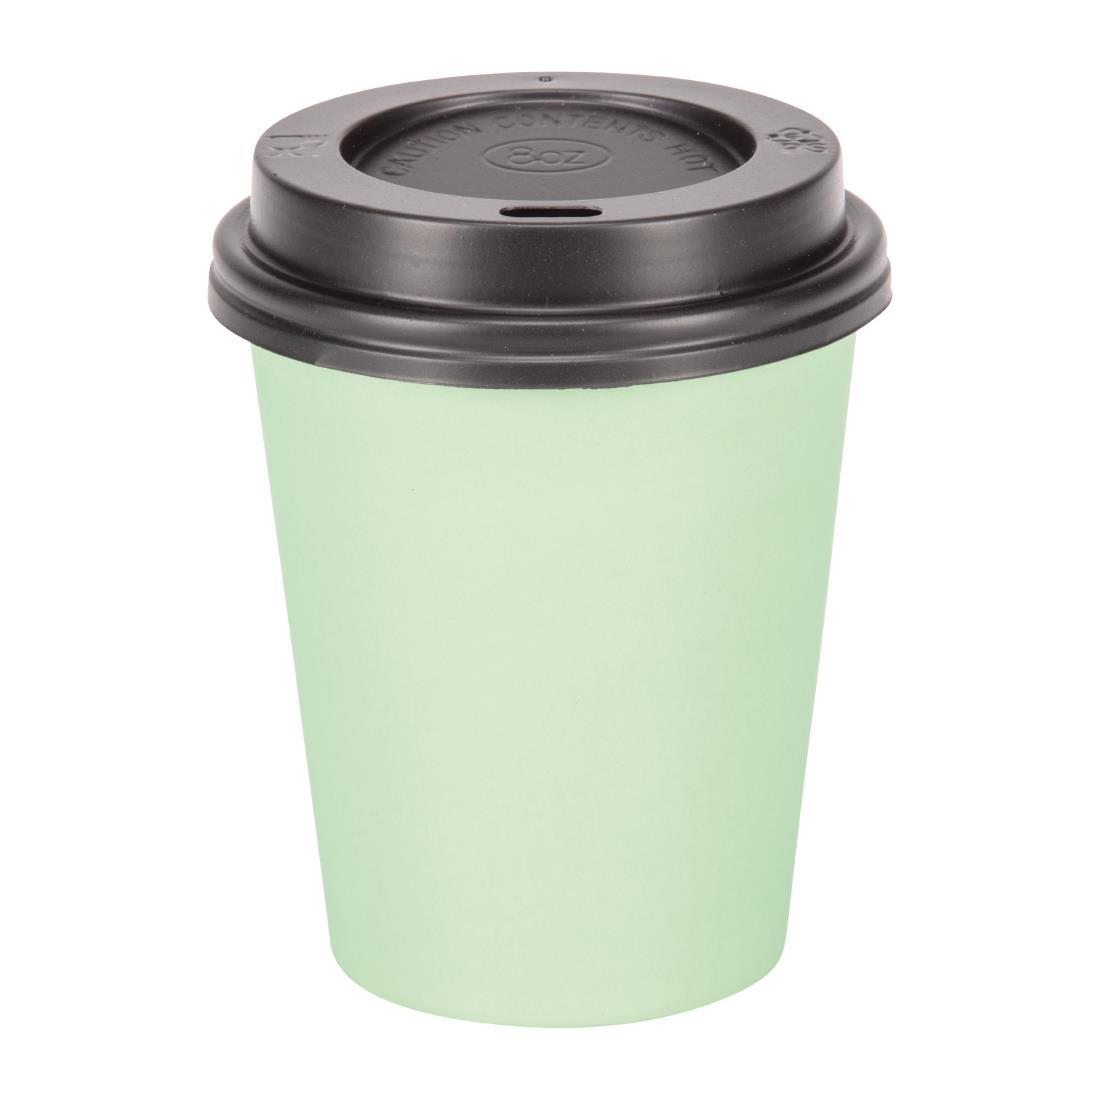 Fiesta Recyclable Coffee Cups Single Wall Turquoise 225ml / 8oz (Pack of 50) - GP400  - 2